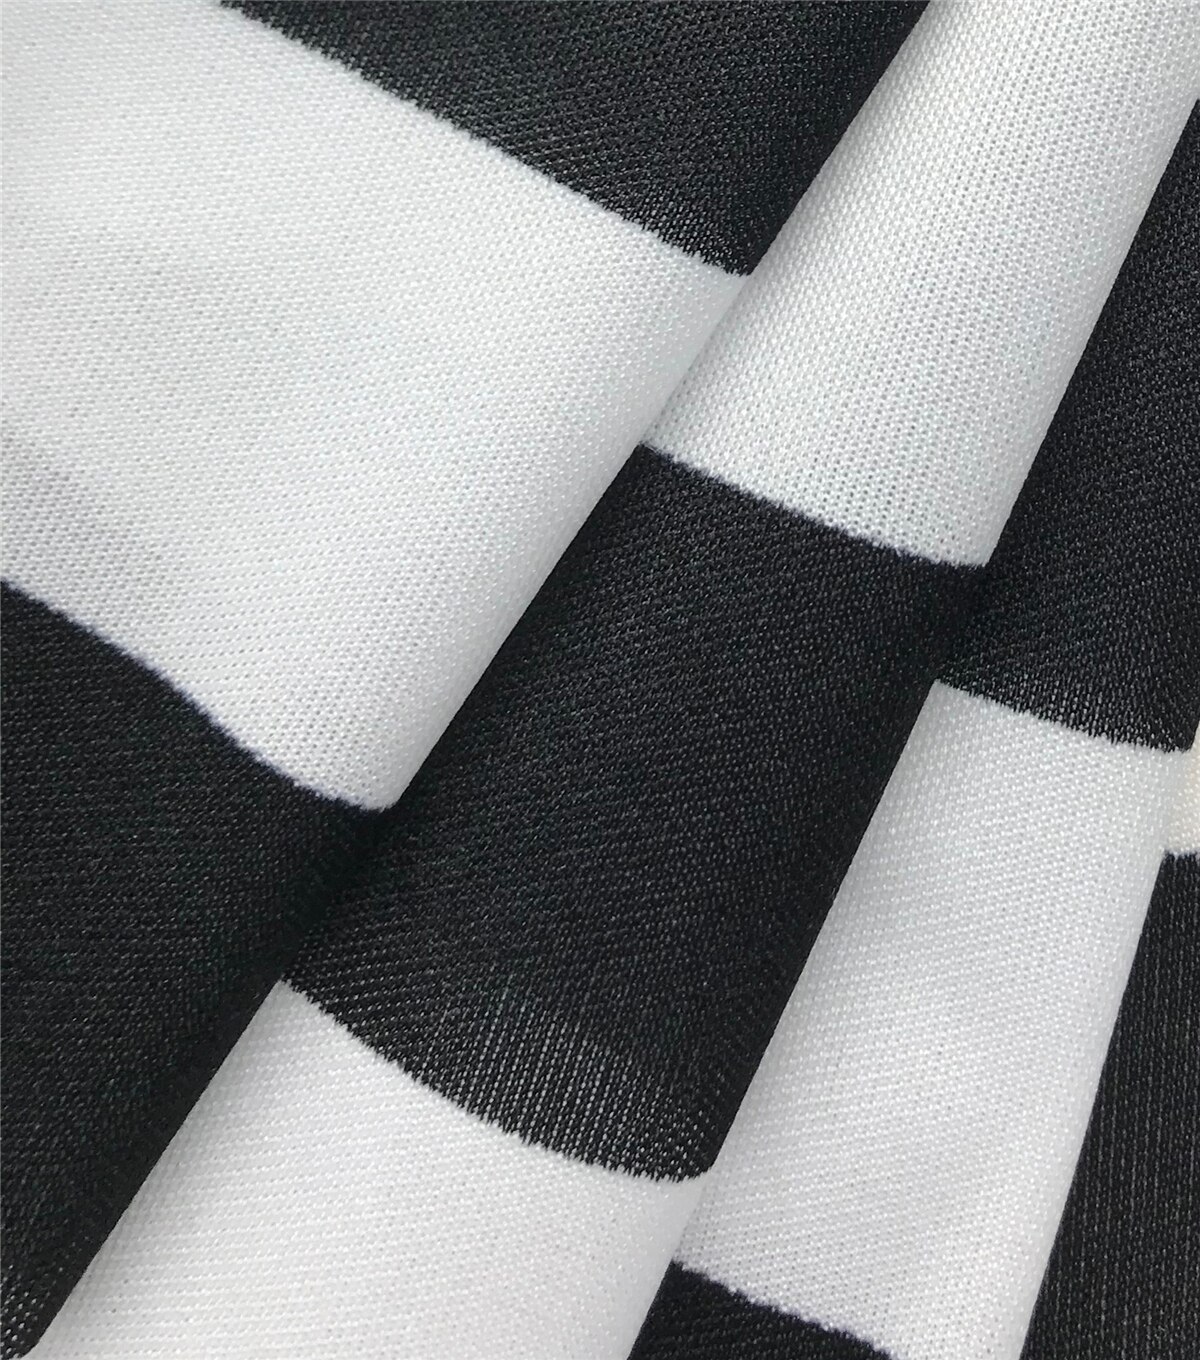 The Witching Hour Costume Knit Fabric-Black White Stripe | JOANN